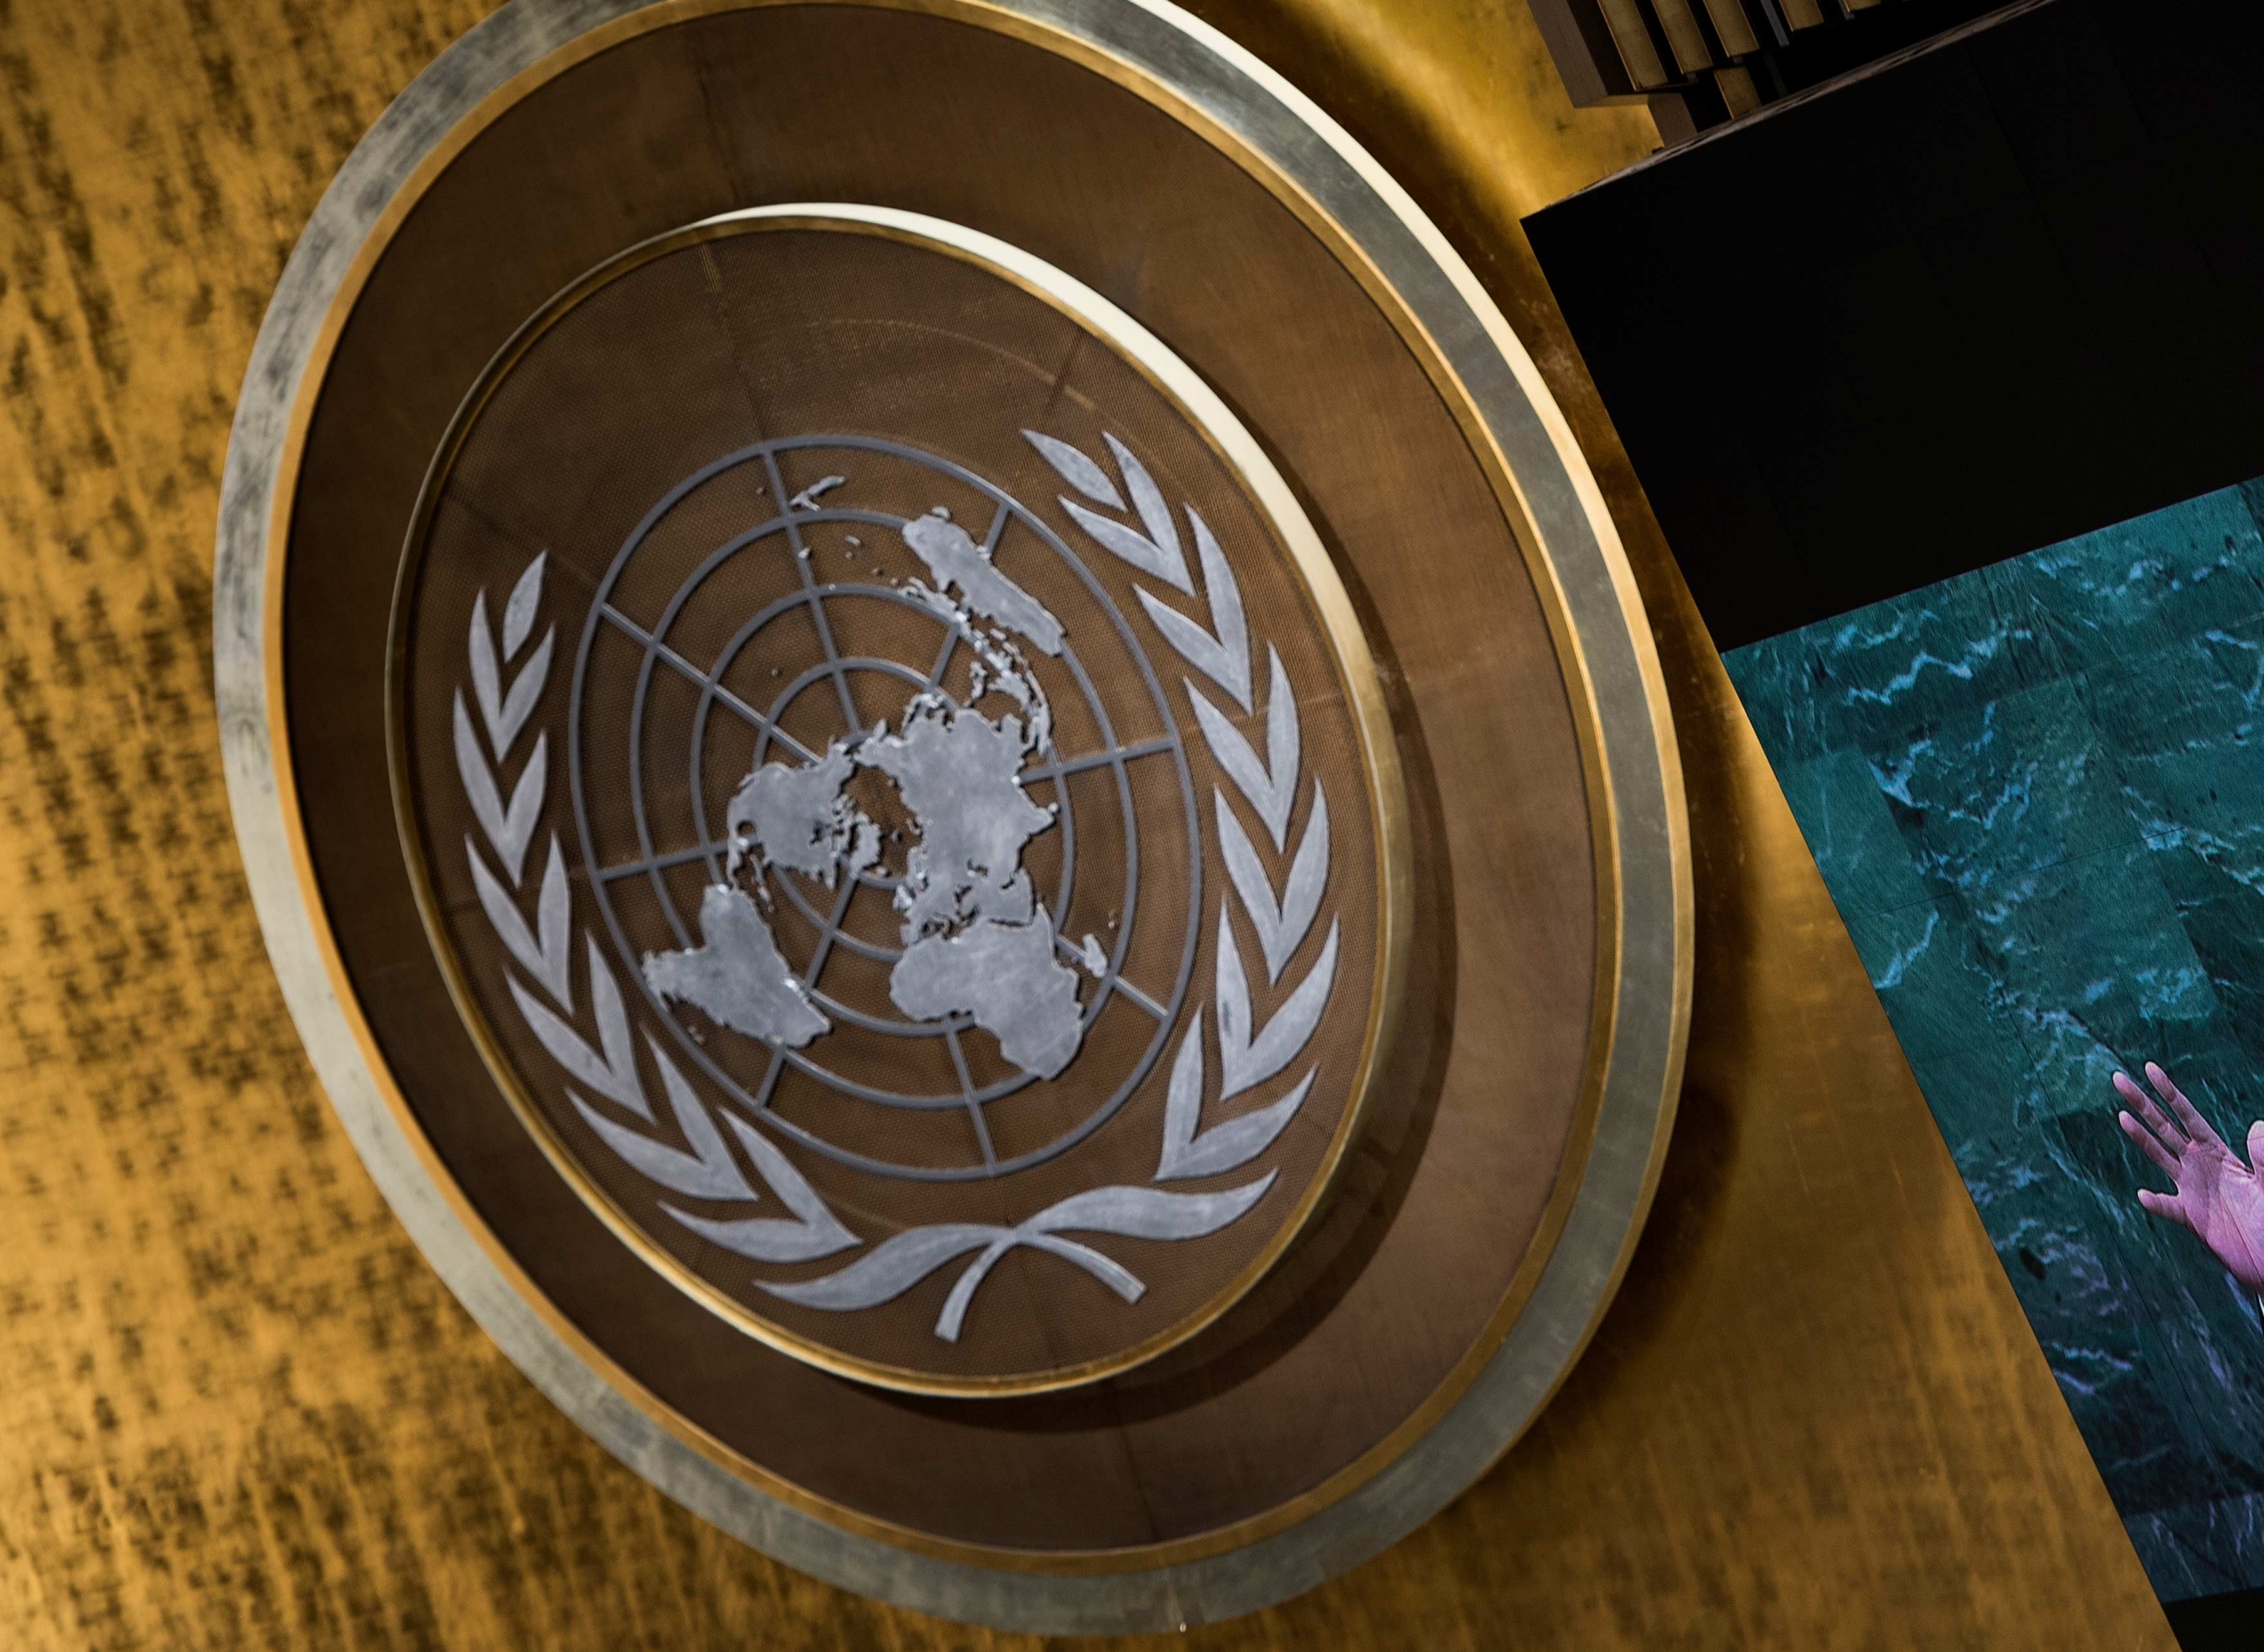 The UN General Assembly held elections on Tuesday for 15 vacant seats in the UN Human Rights Council.